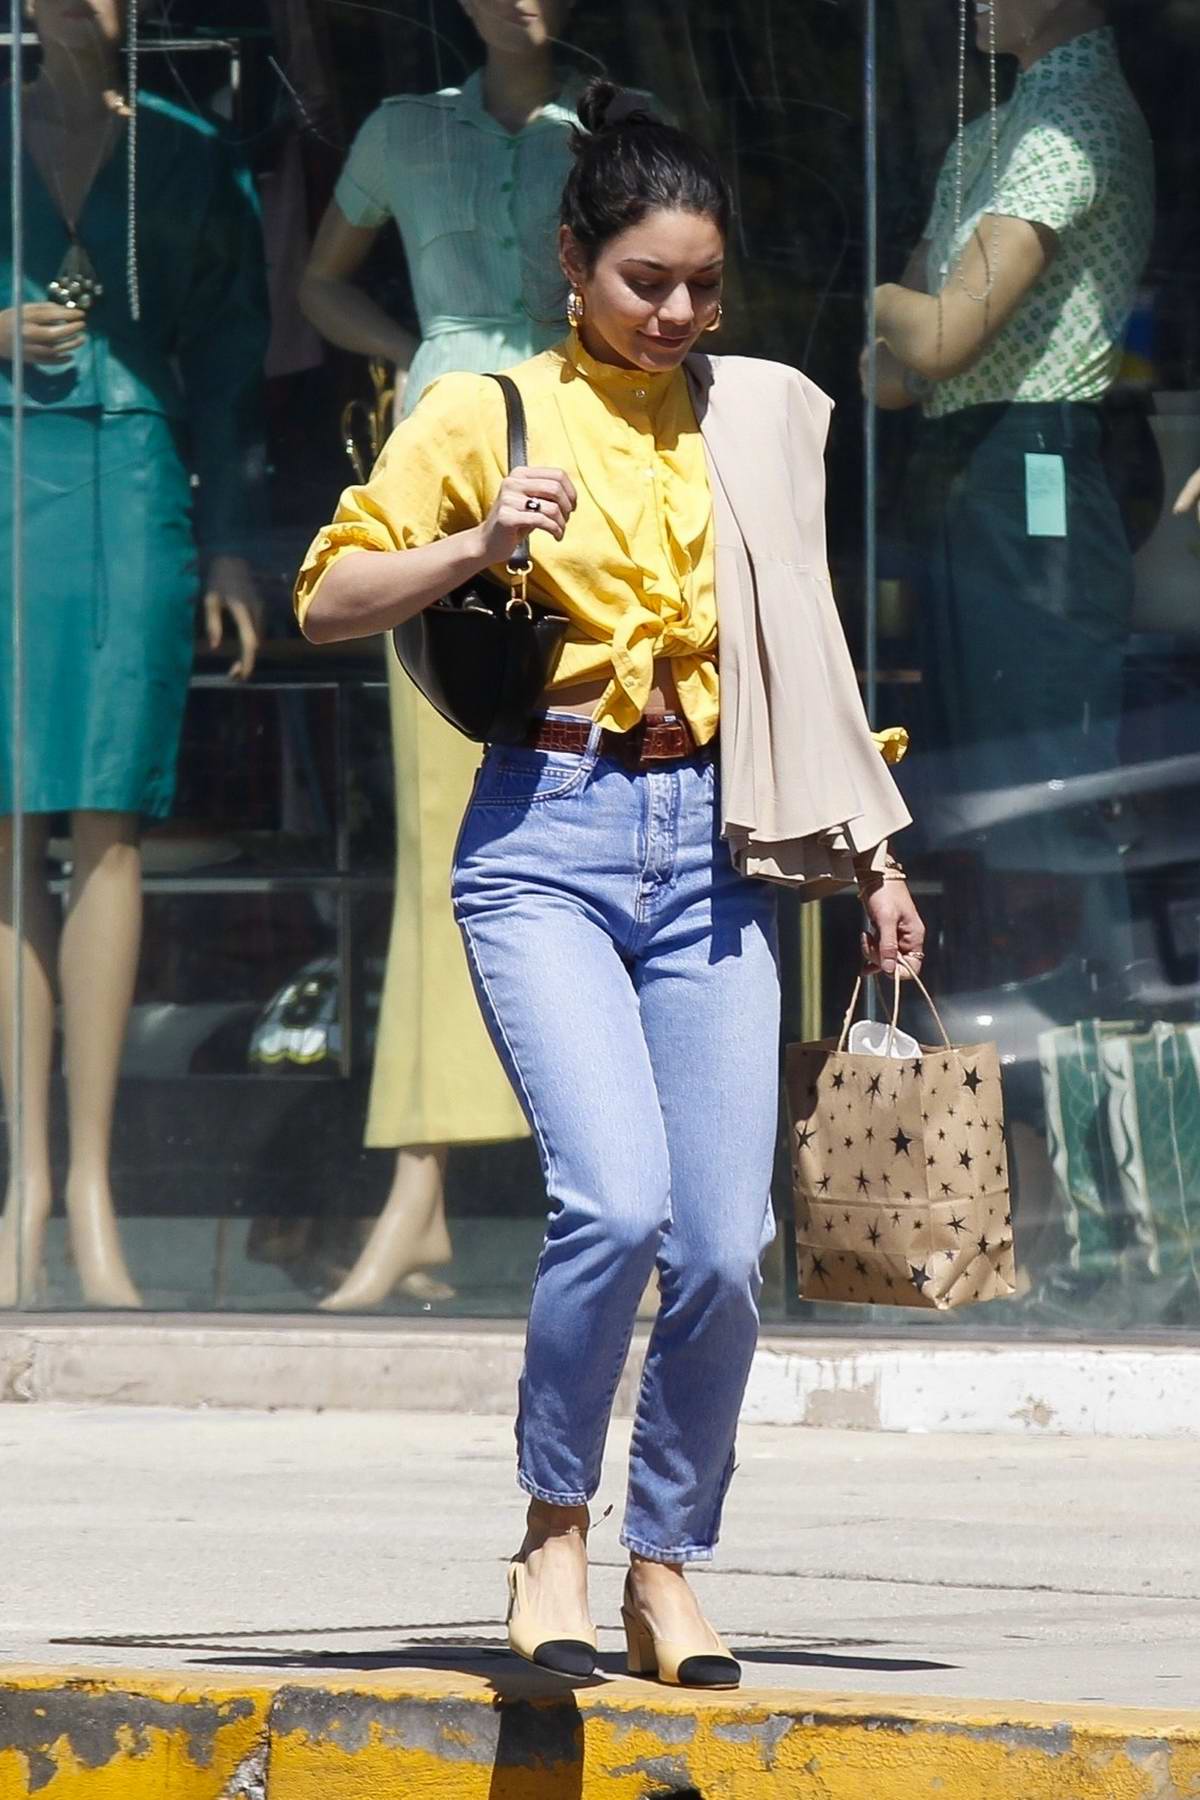 vanessa hudgens dons cute yellow blouse and jeans while out in ...